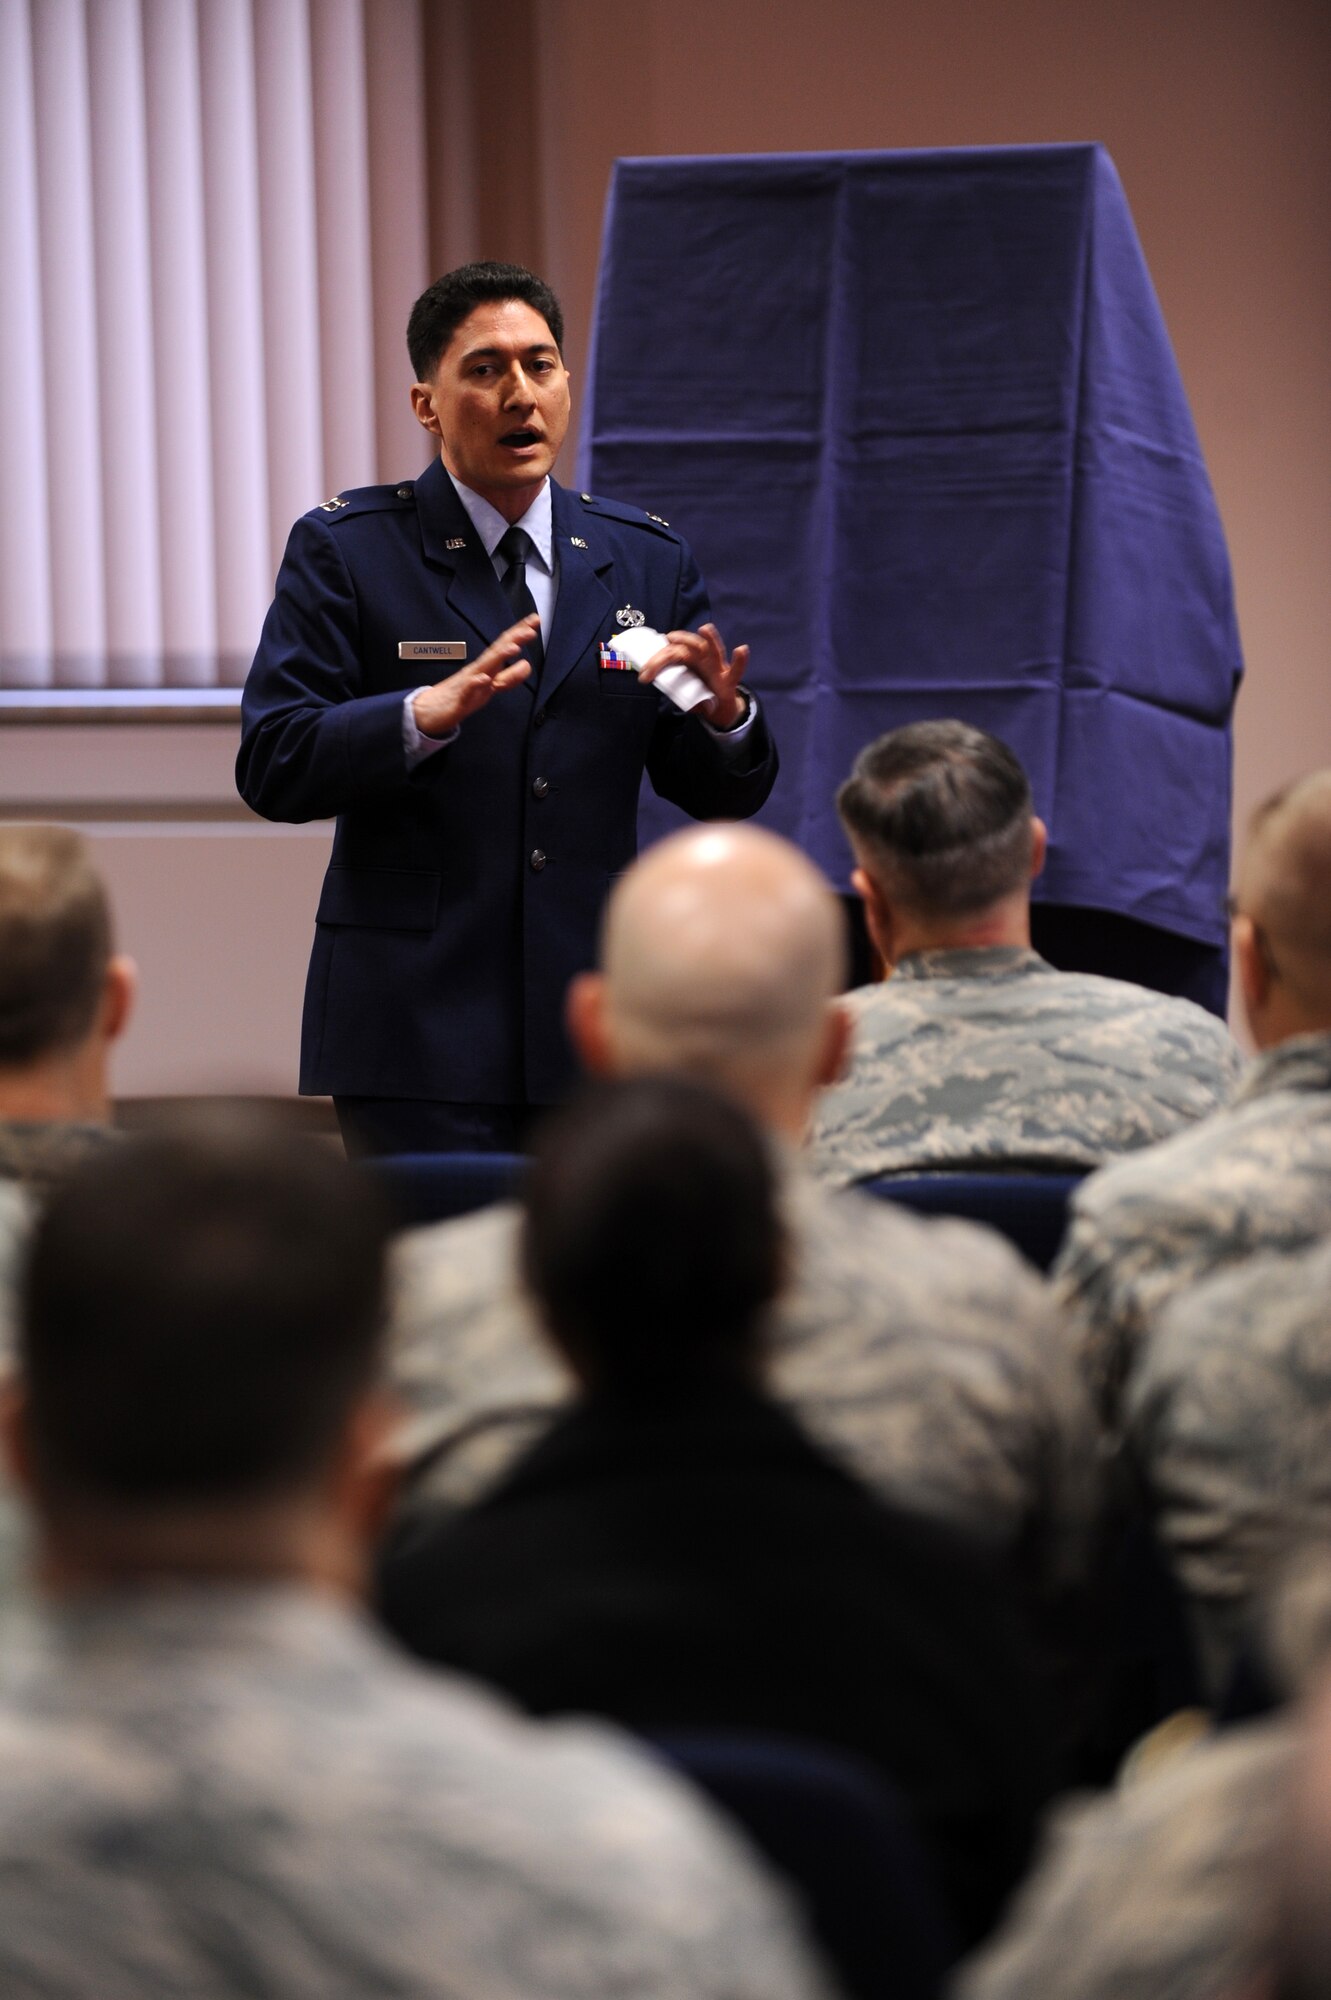 SPANGDAHLEM AIR BASE, Germany – Capt. Hubert Cantwell, 52nd Equipment Maintenance Squadron maintenance operations officer, speaks about the contributions to the Air Force made by Lt. Gen. Leo Marquez at a dedication ceremony at the Eifel Community Center here Jan. 31. Airmen attended the event to honor the Marquez and his 33 years of Air Force service. Some of Marquez’ additions include the implementation of the Air Force Combat Ammunitions Center — an advanced training course for munitions Airmen — and the maintenance badge that all Air Force maintainers now wear. Marquez died Dec. 30, 2011, at age 79. (U.S. Air Force photo/Airman 1st Class Matthew B. Fredericks)